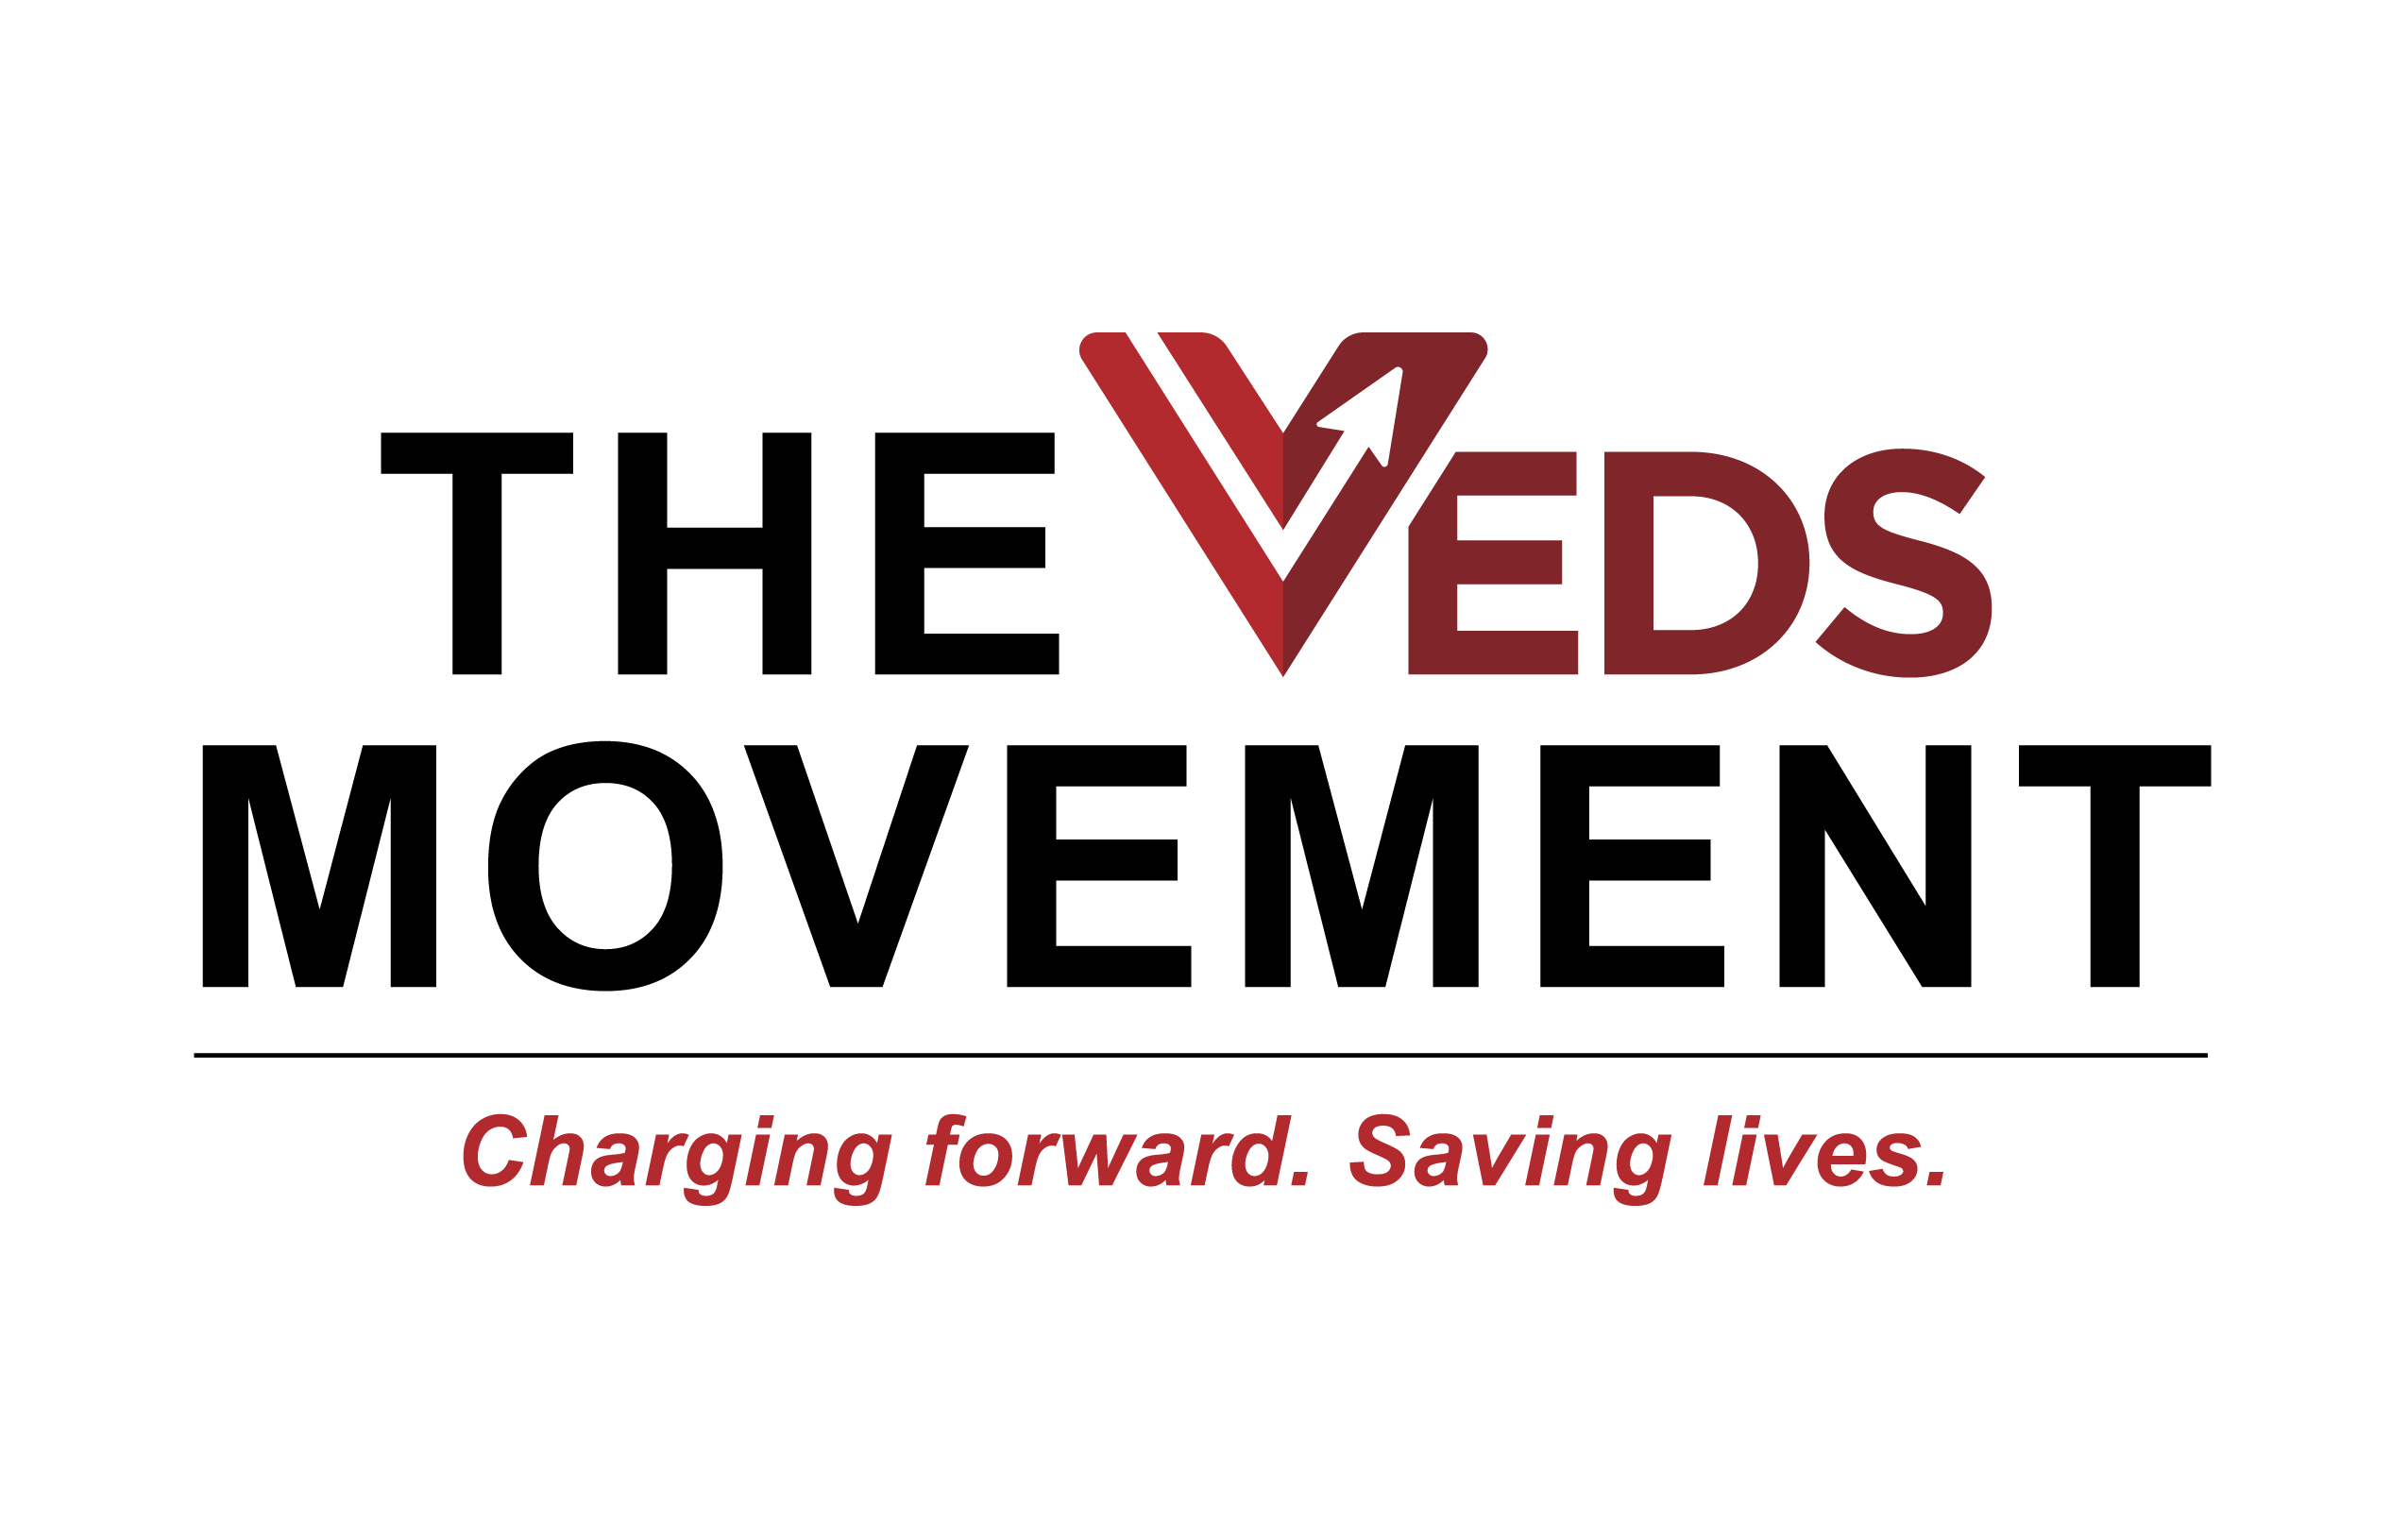 The VEDS Movement